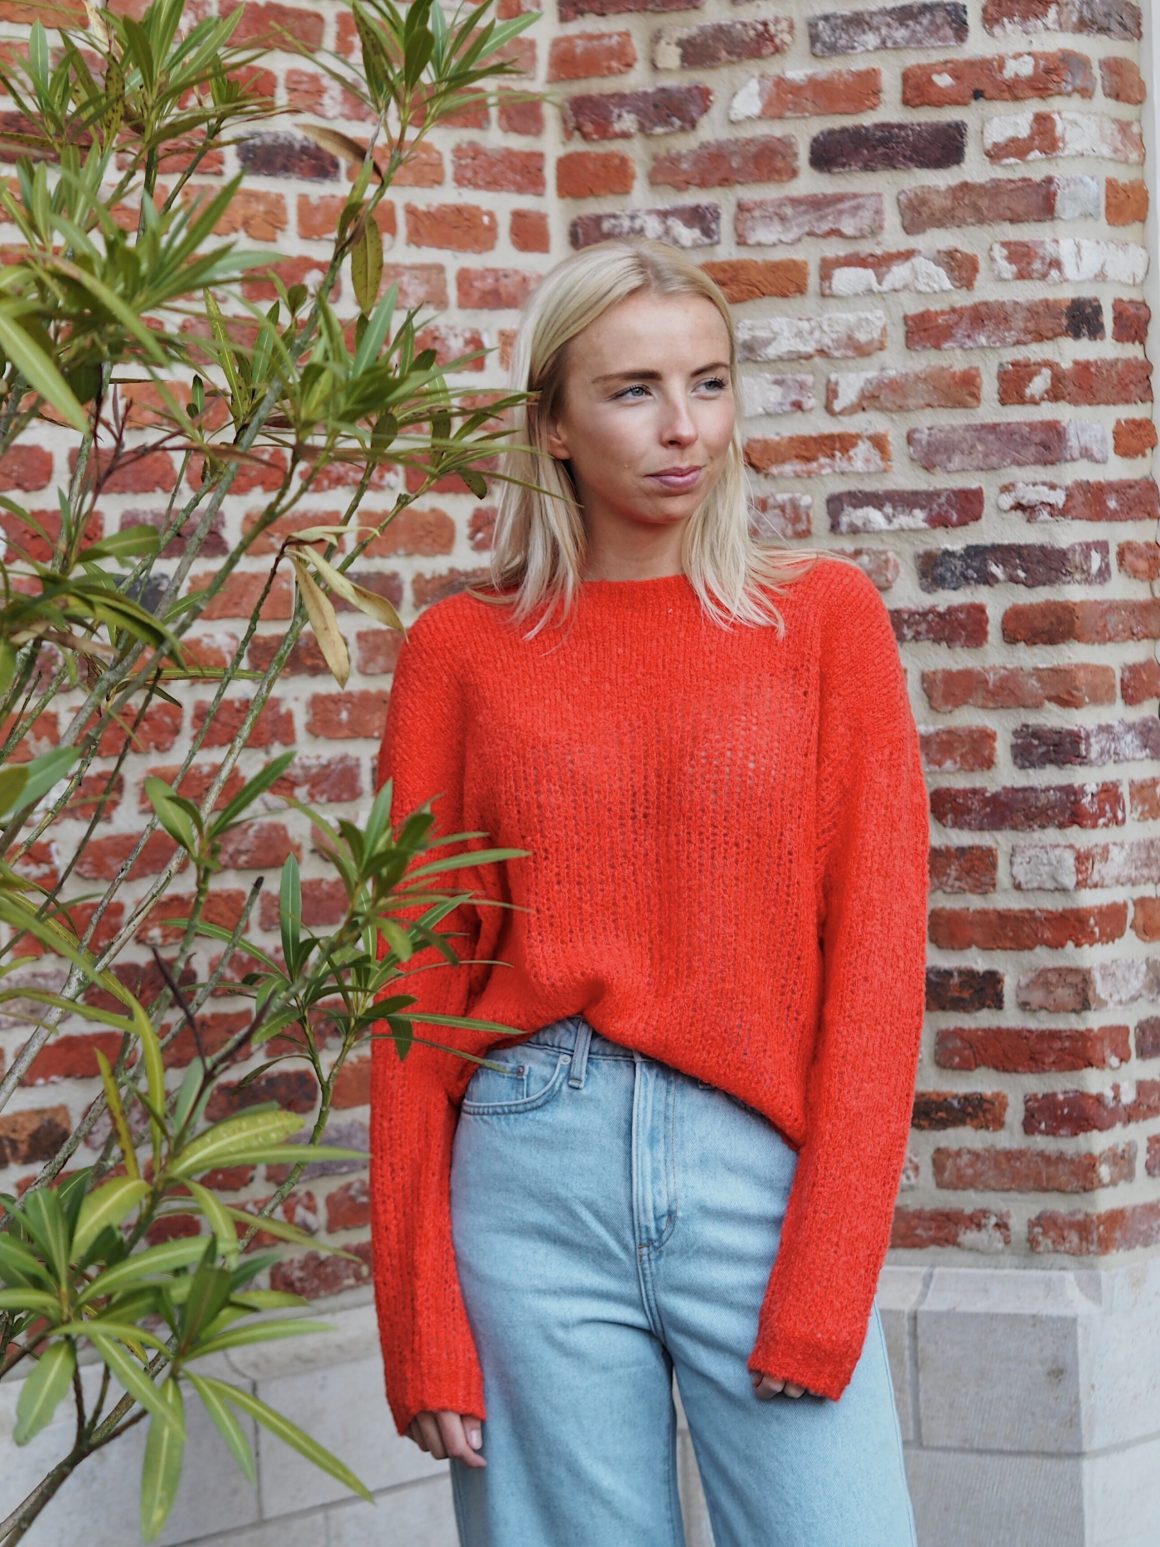 The Faces Behind LN pt. 6: Cosy Charlotte is Back! – LN|Knits